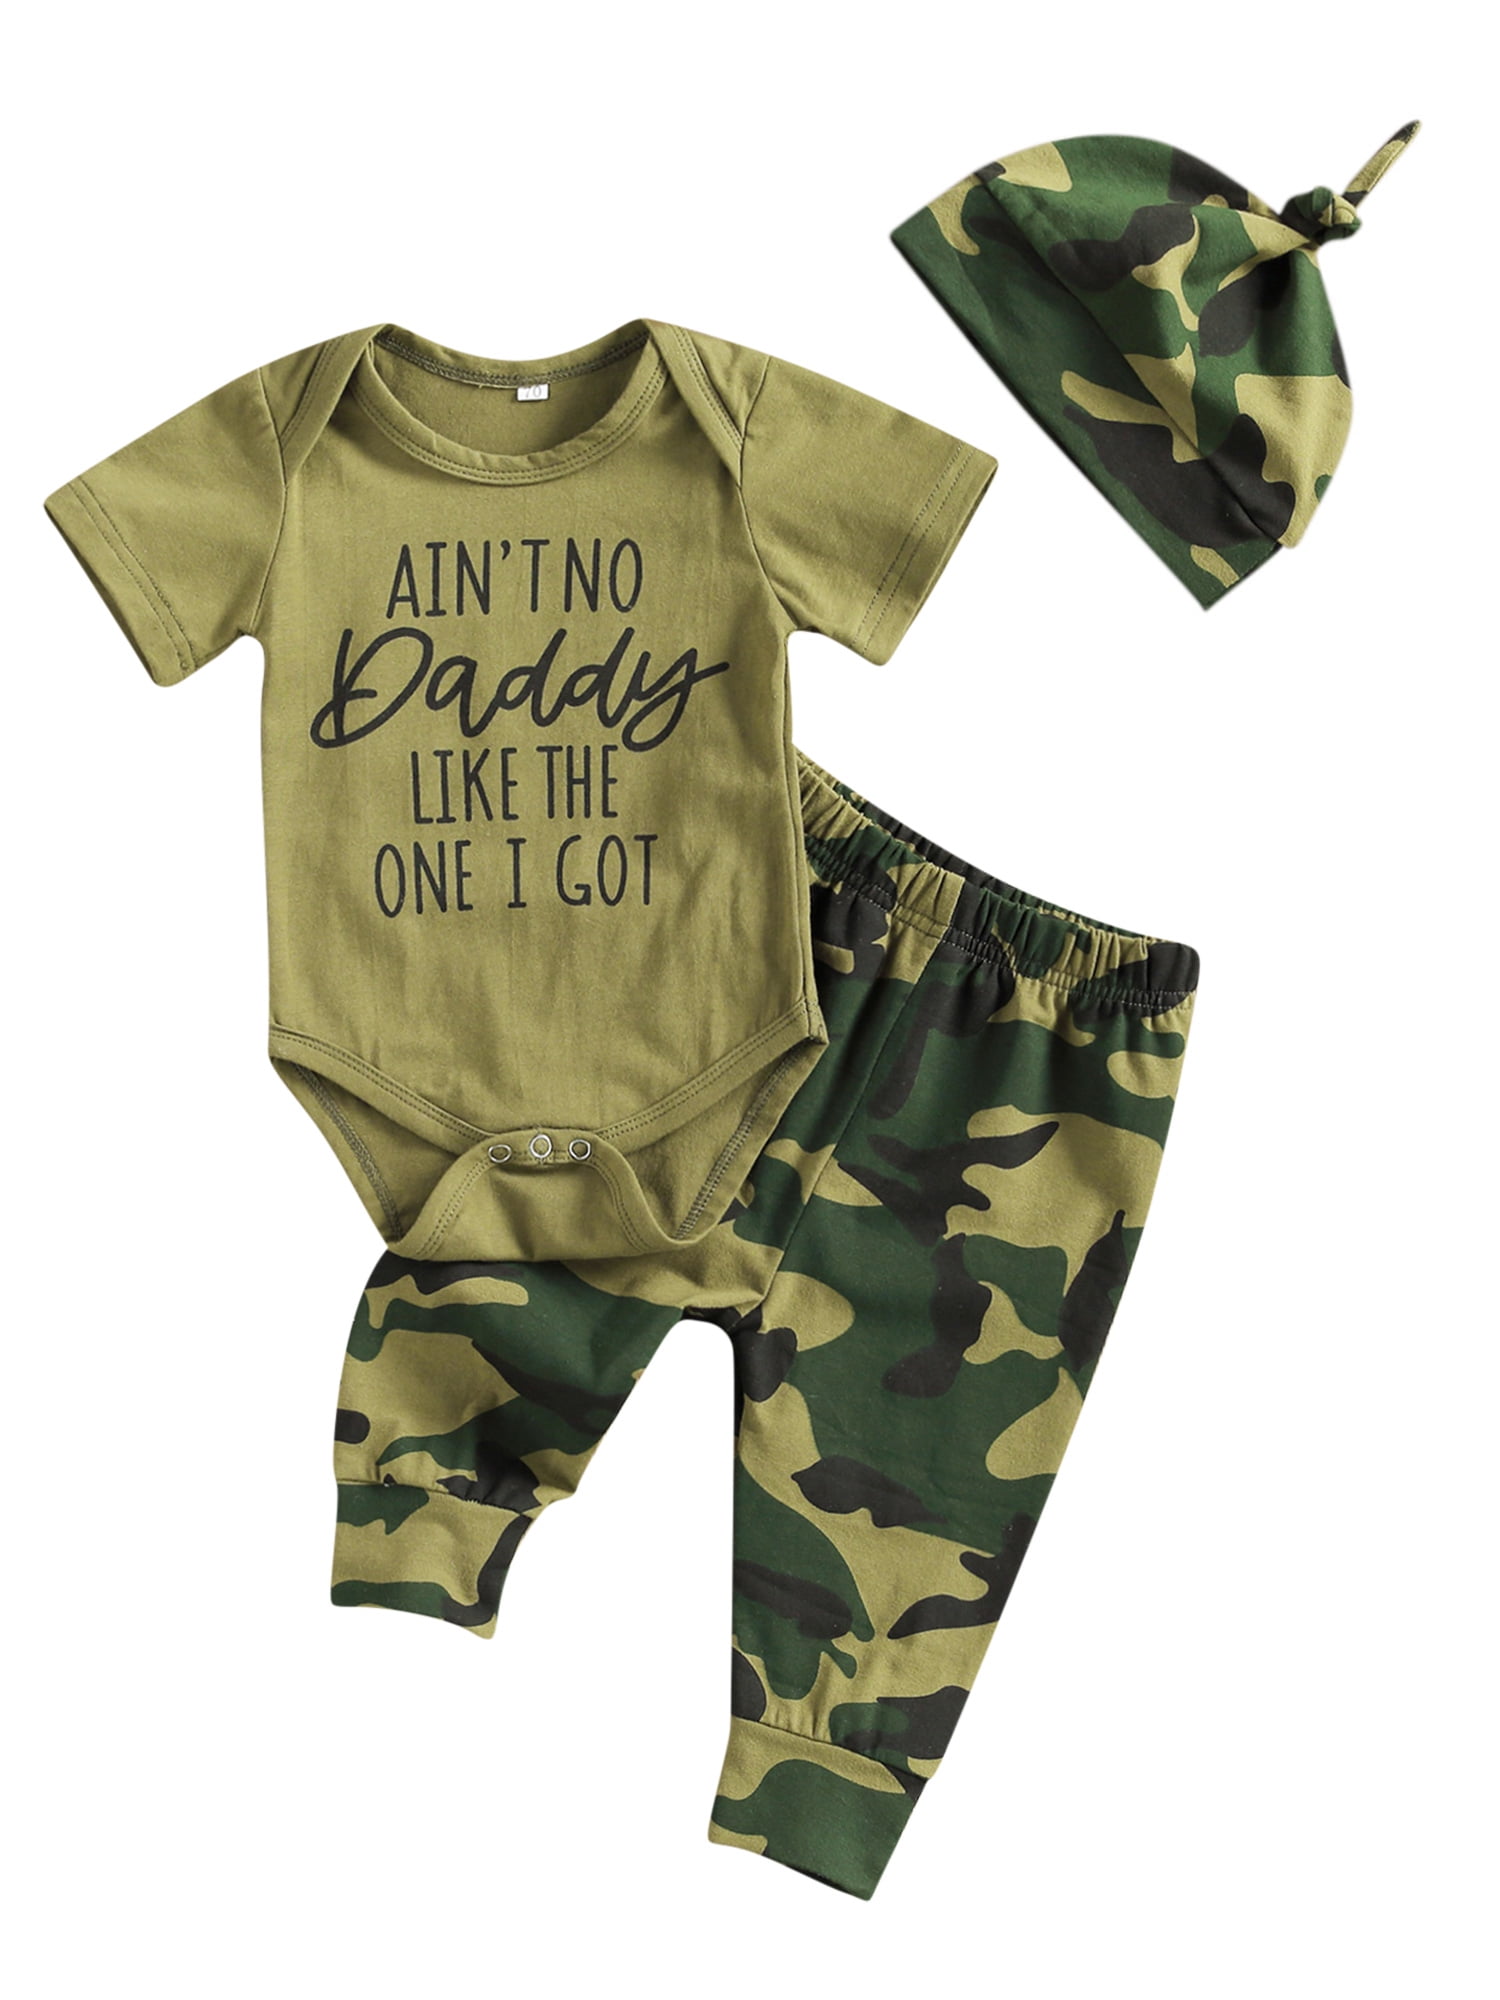 Newborn Baby Boy Clothes,Hoodies & Pants Outfits Clothes Sets,Toddler Boys 0-18 M Camo Print Sweatshirt Pullover 